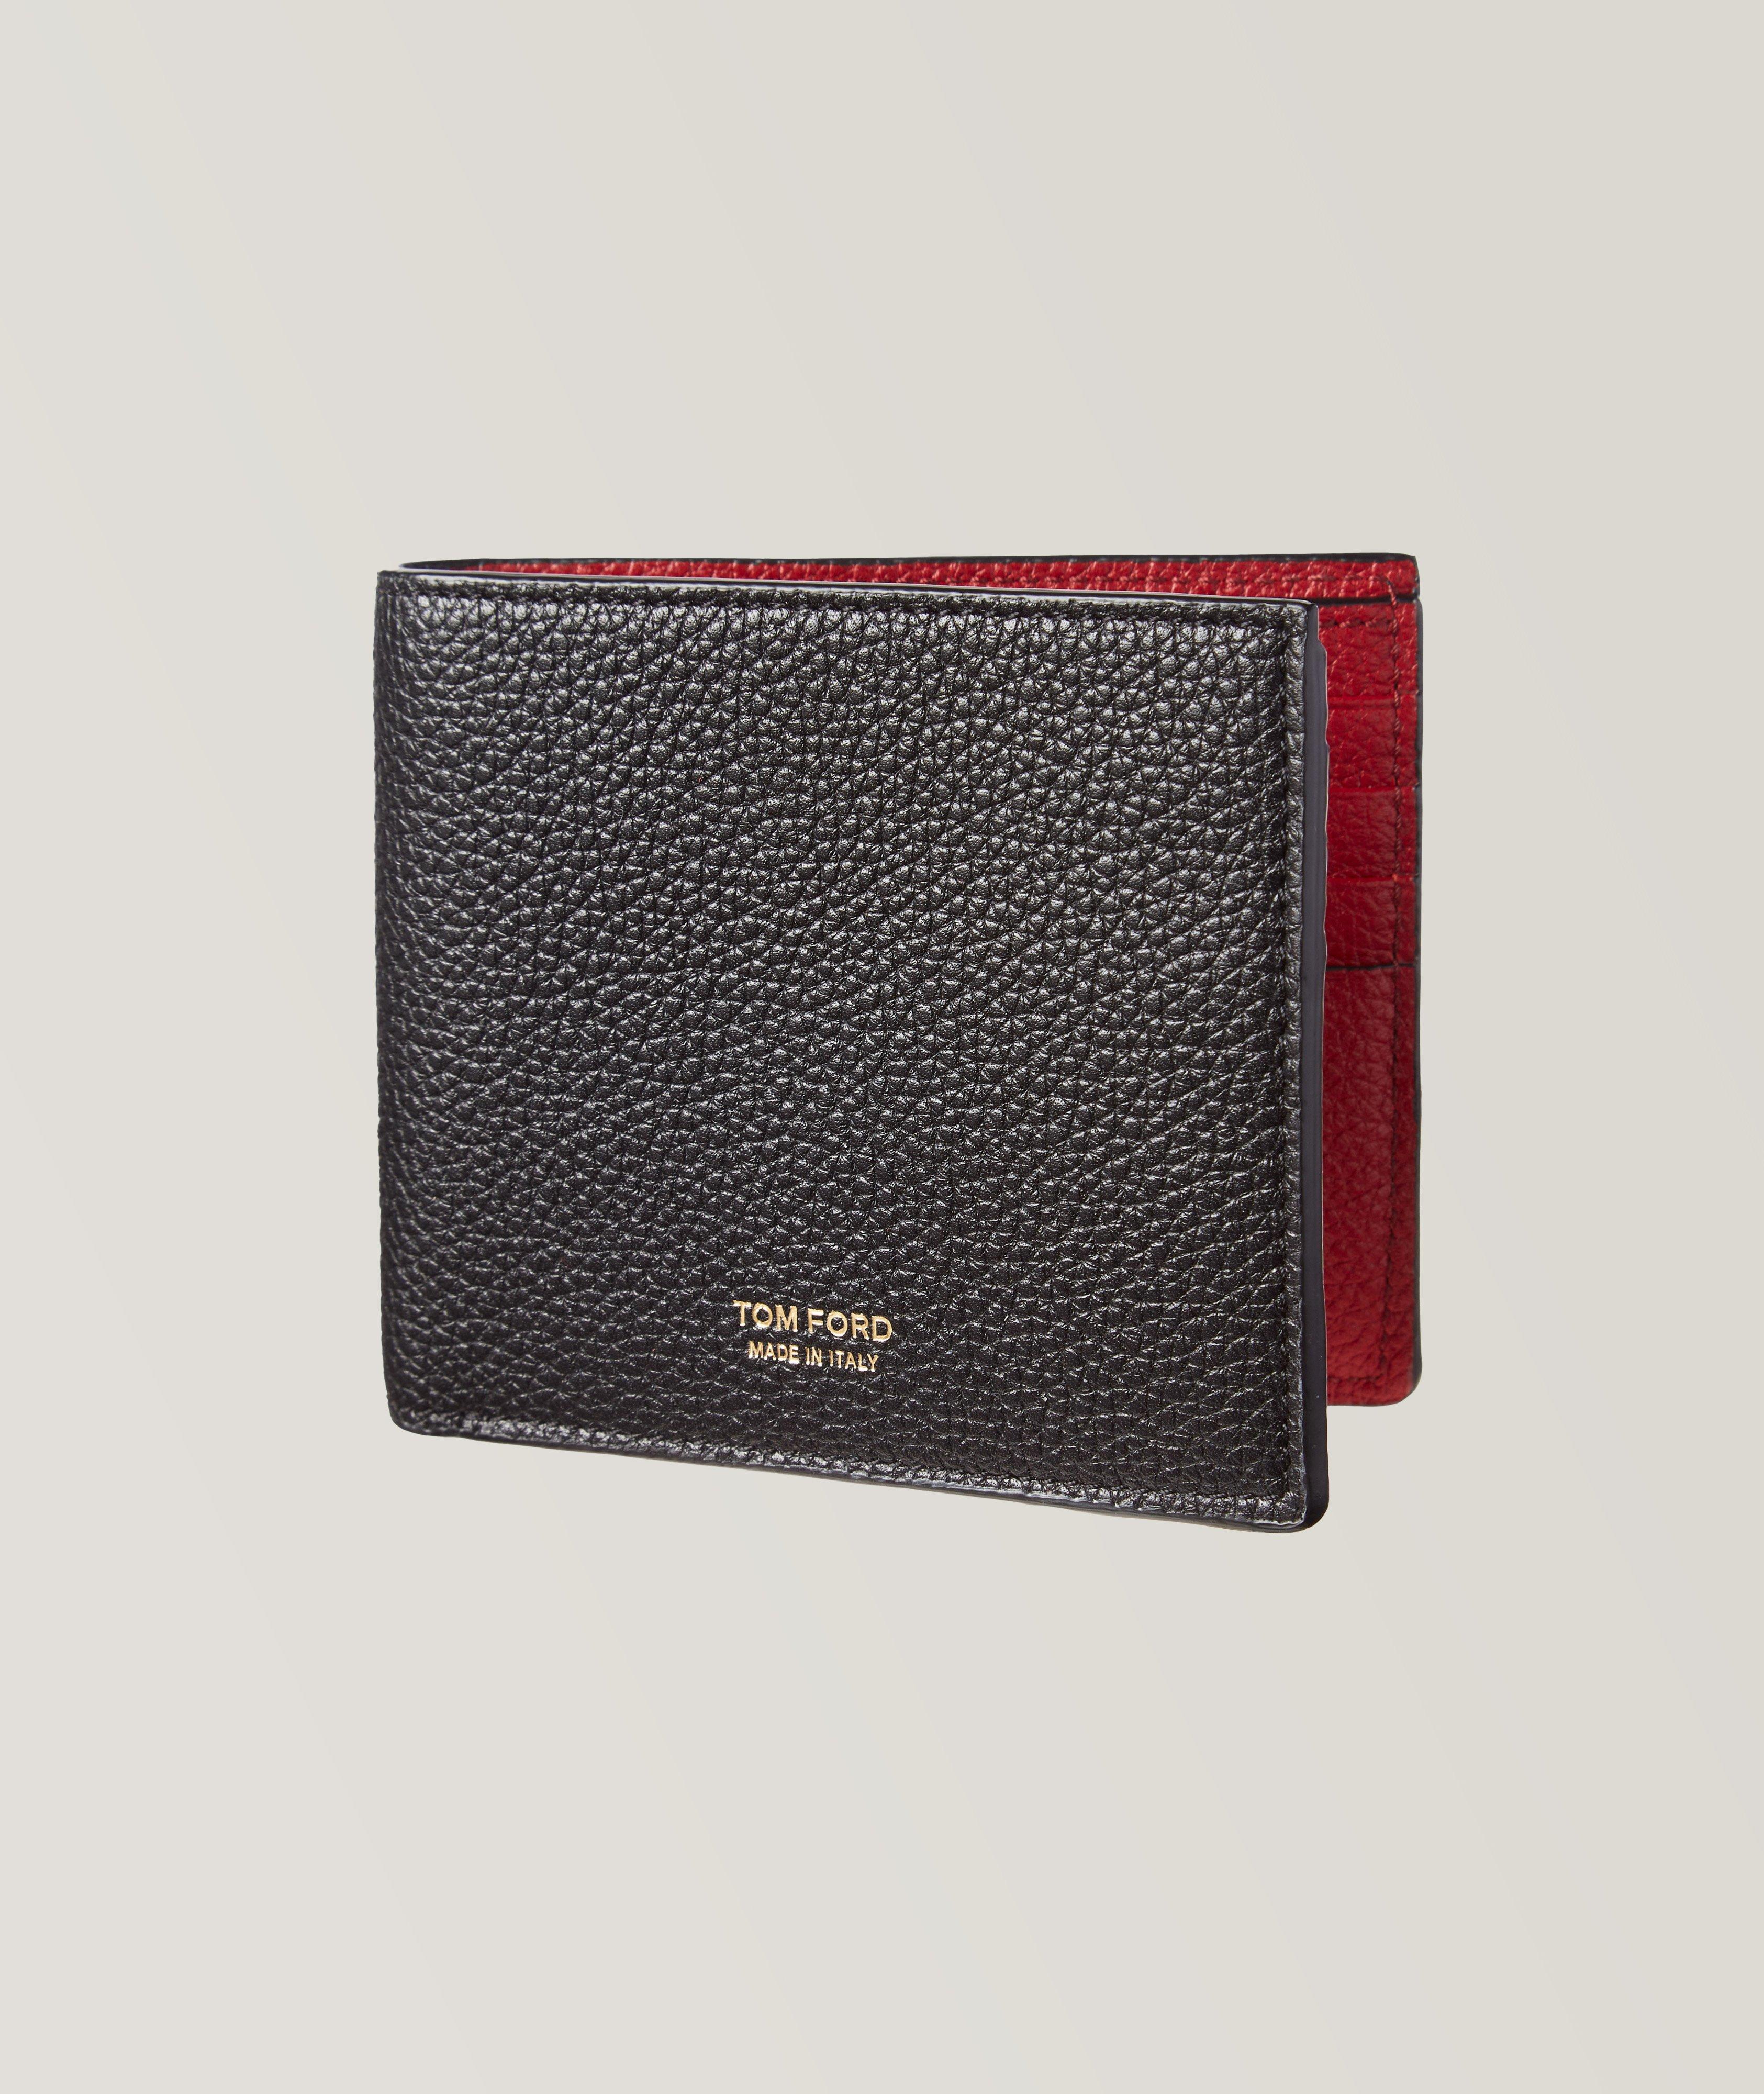 Pebbled Leather Bifold Wallet image 0